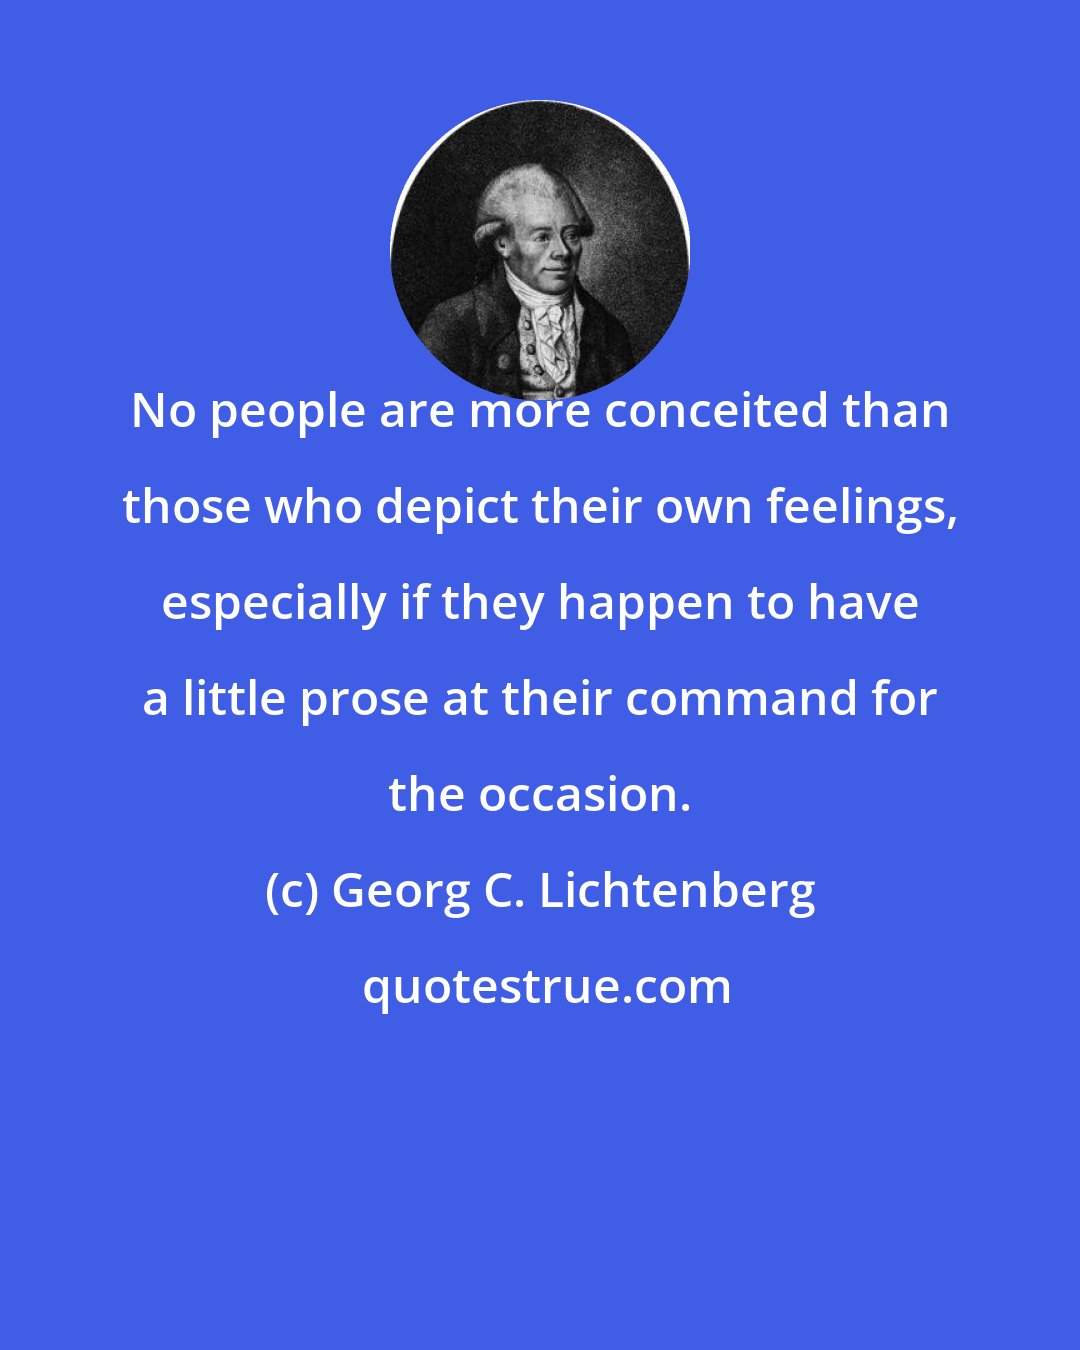 Georg C. Lichtenberg: No people are more conceited than those who depict their own feelings, especially if they happen to have a little prose at their command for the occasion.